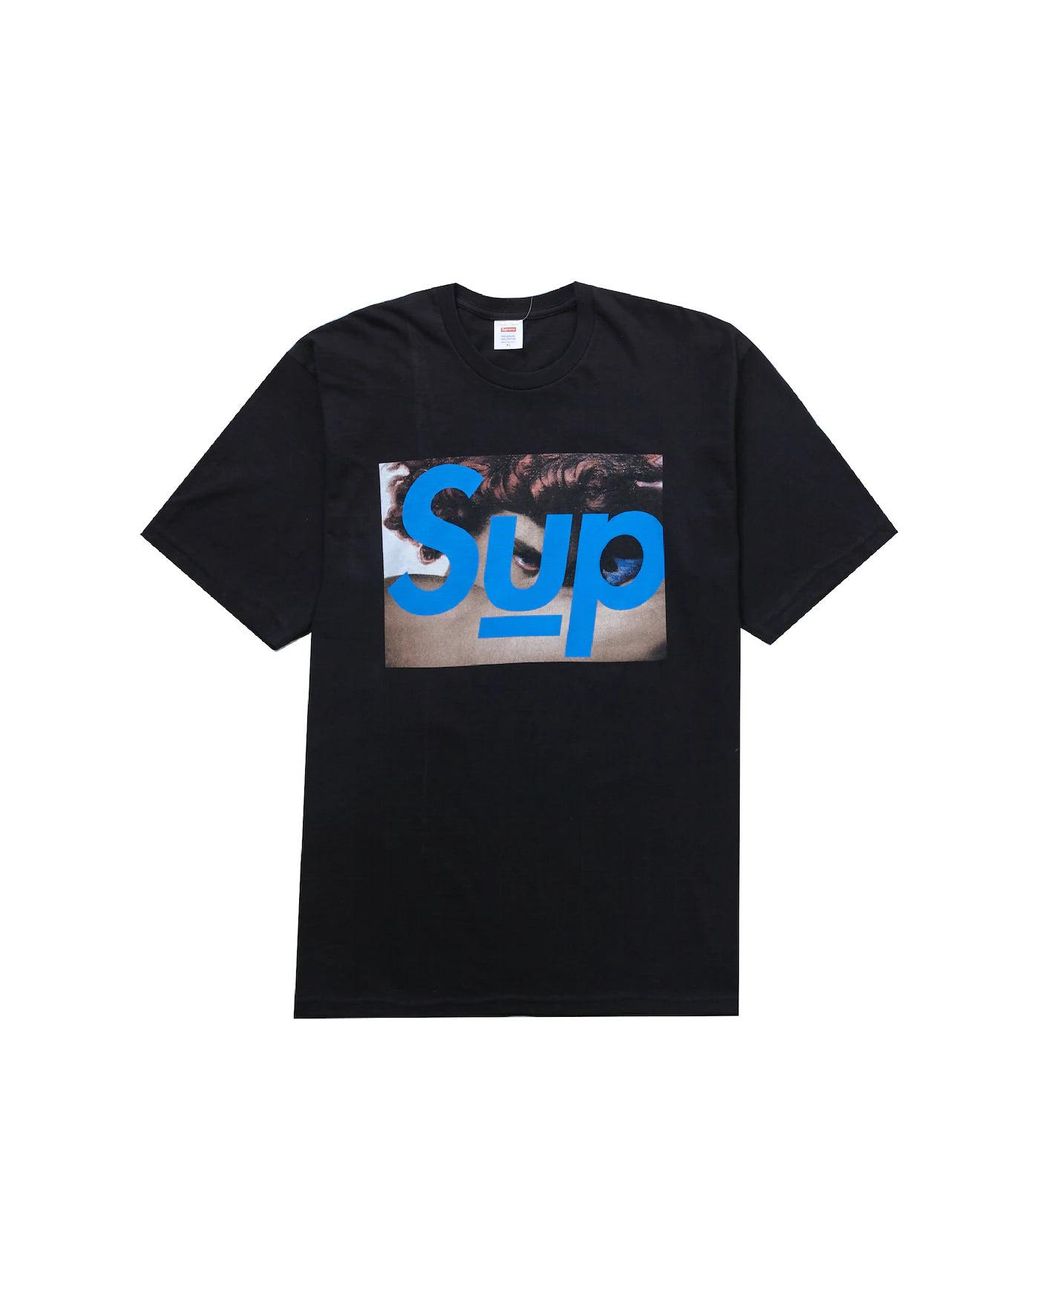 Supreme Undercover Face Tee Black | Lyst